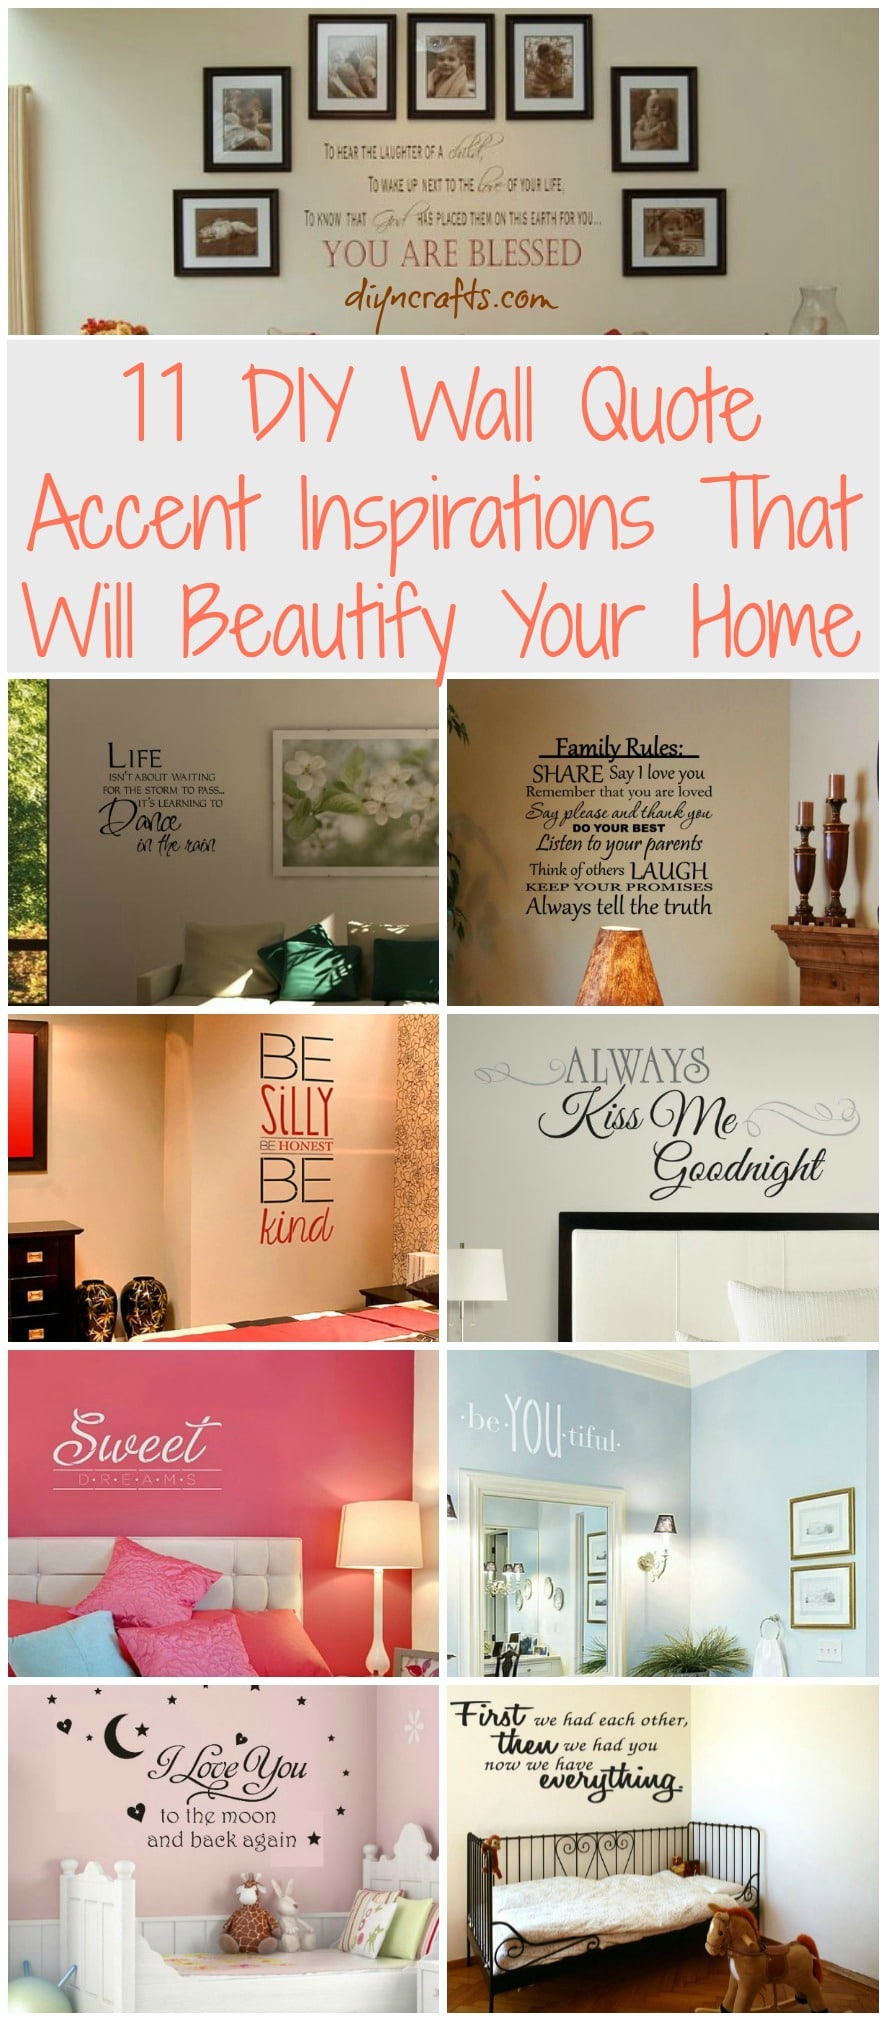 11 DIY Wall Quote Accent Inspirations That Will Beautify Your Home